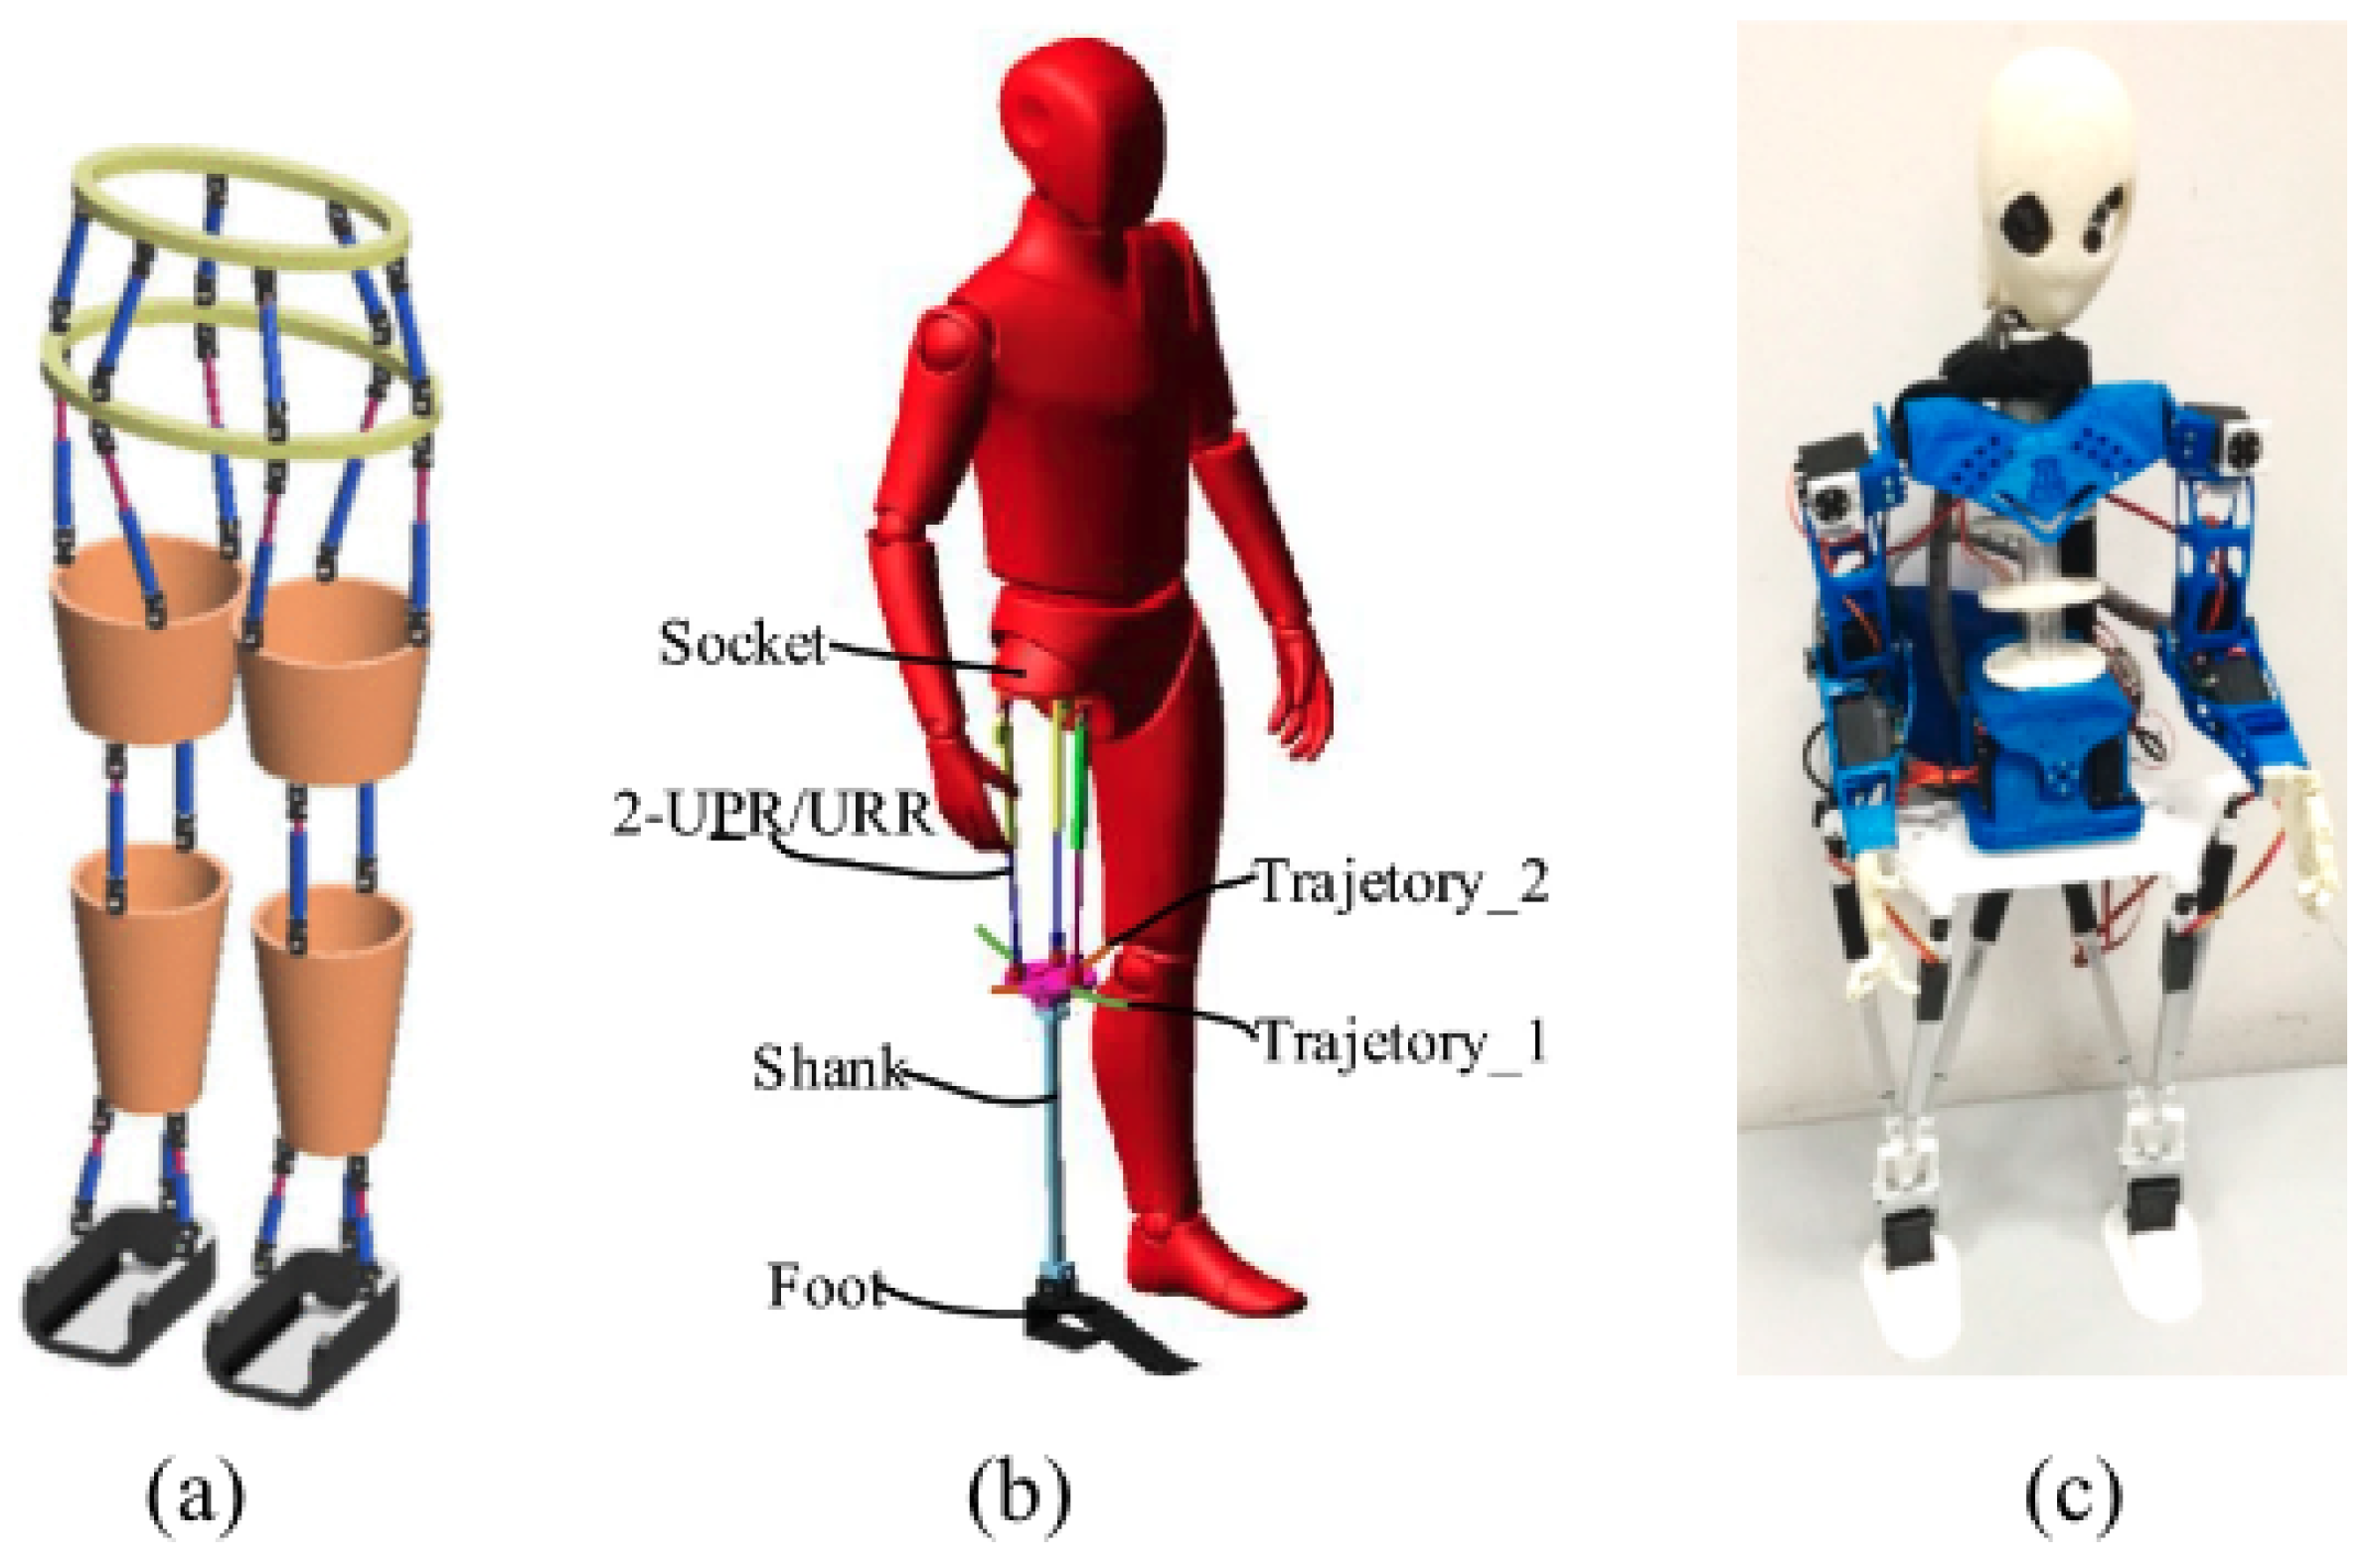 Robotics | Free Full-Text | A Review of Parallel Robots: Rehabilitation,  Assistance, and Humanoid Applications for Neck, Shoulder, Wrist, Hip, and  Ankle Joints